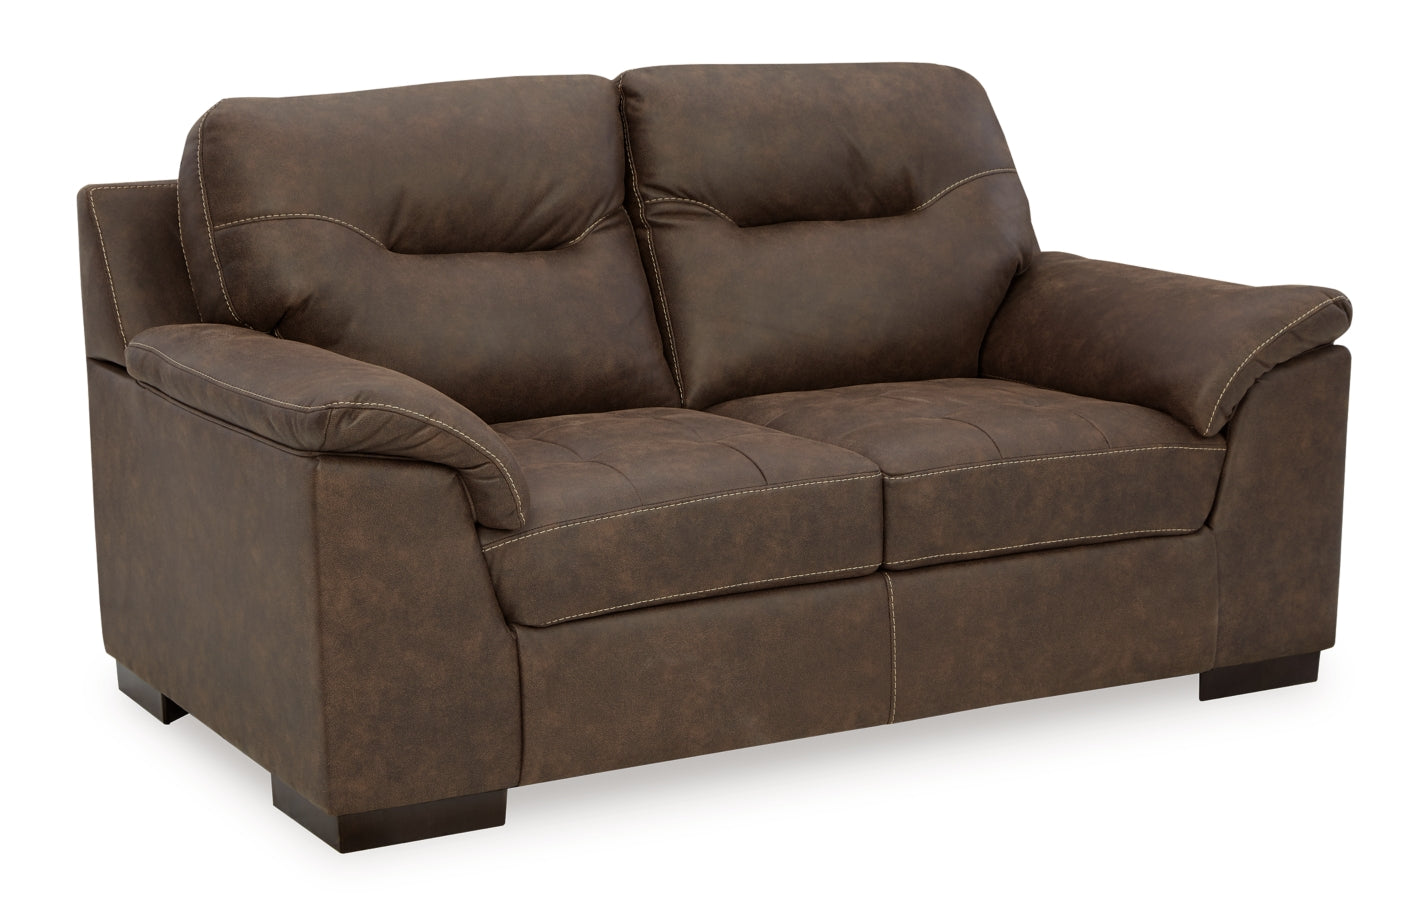 Maderla Sofa, Loveseat and Chair - furniture place usa